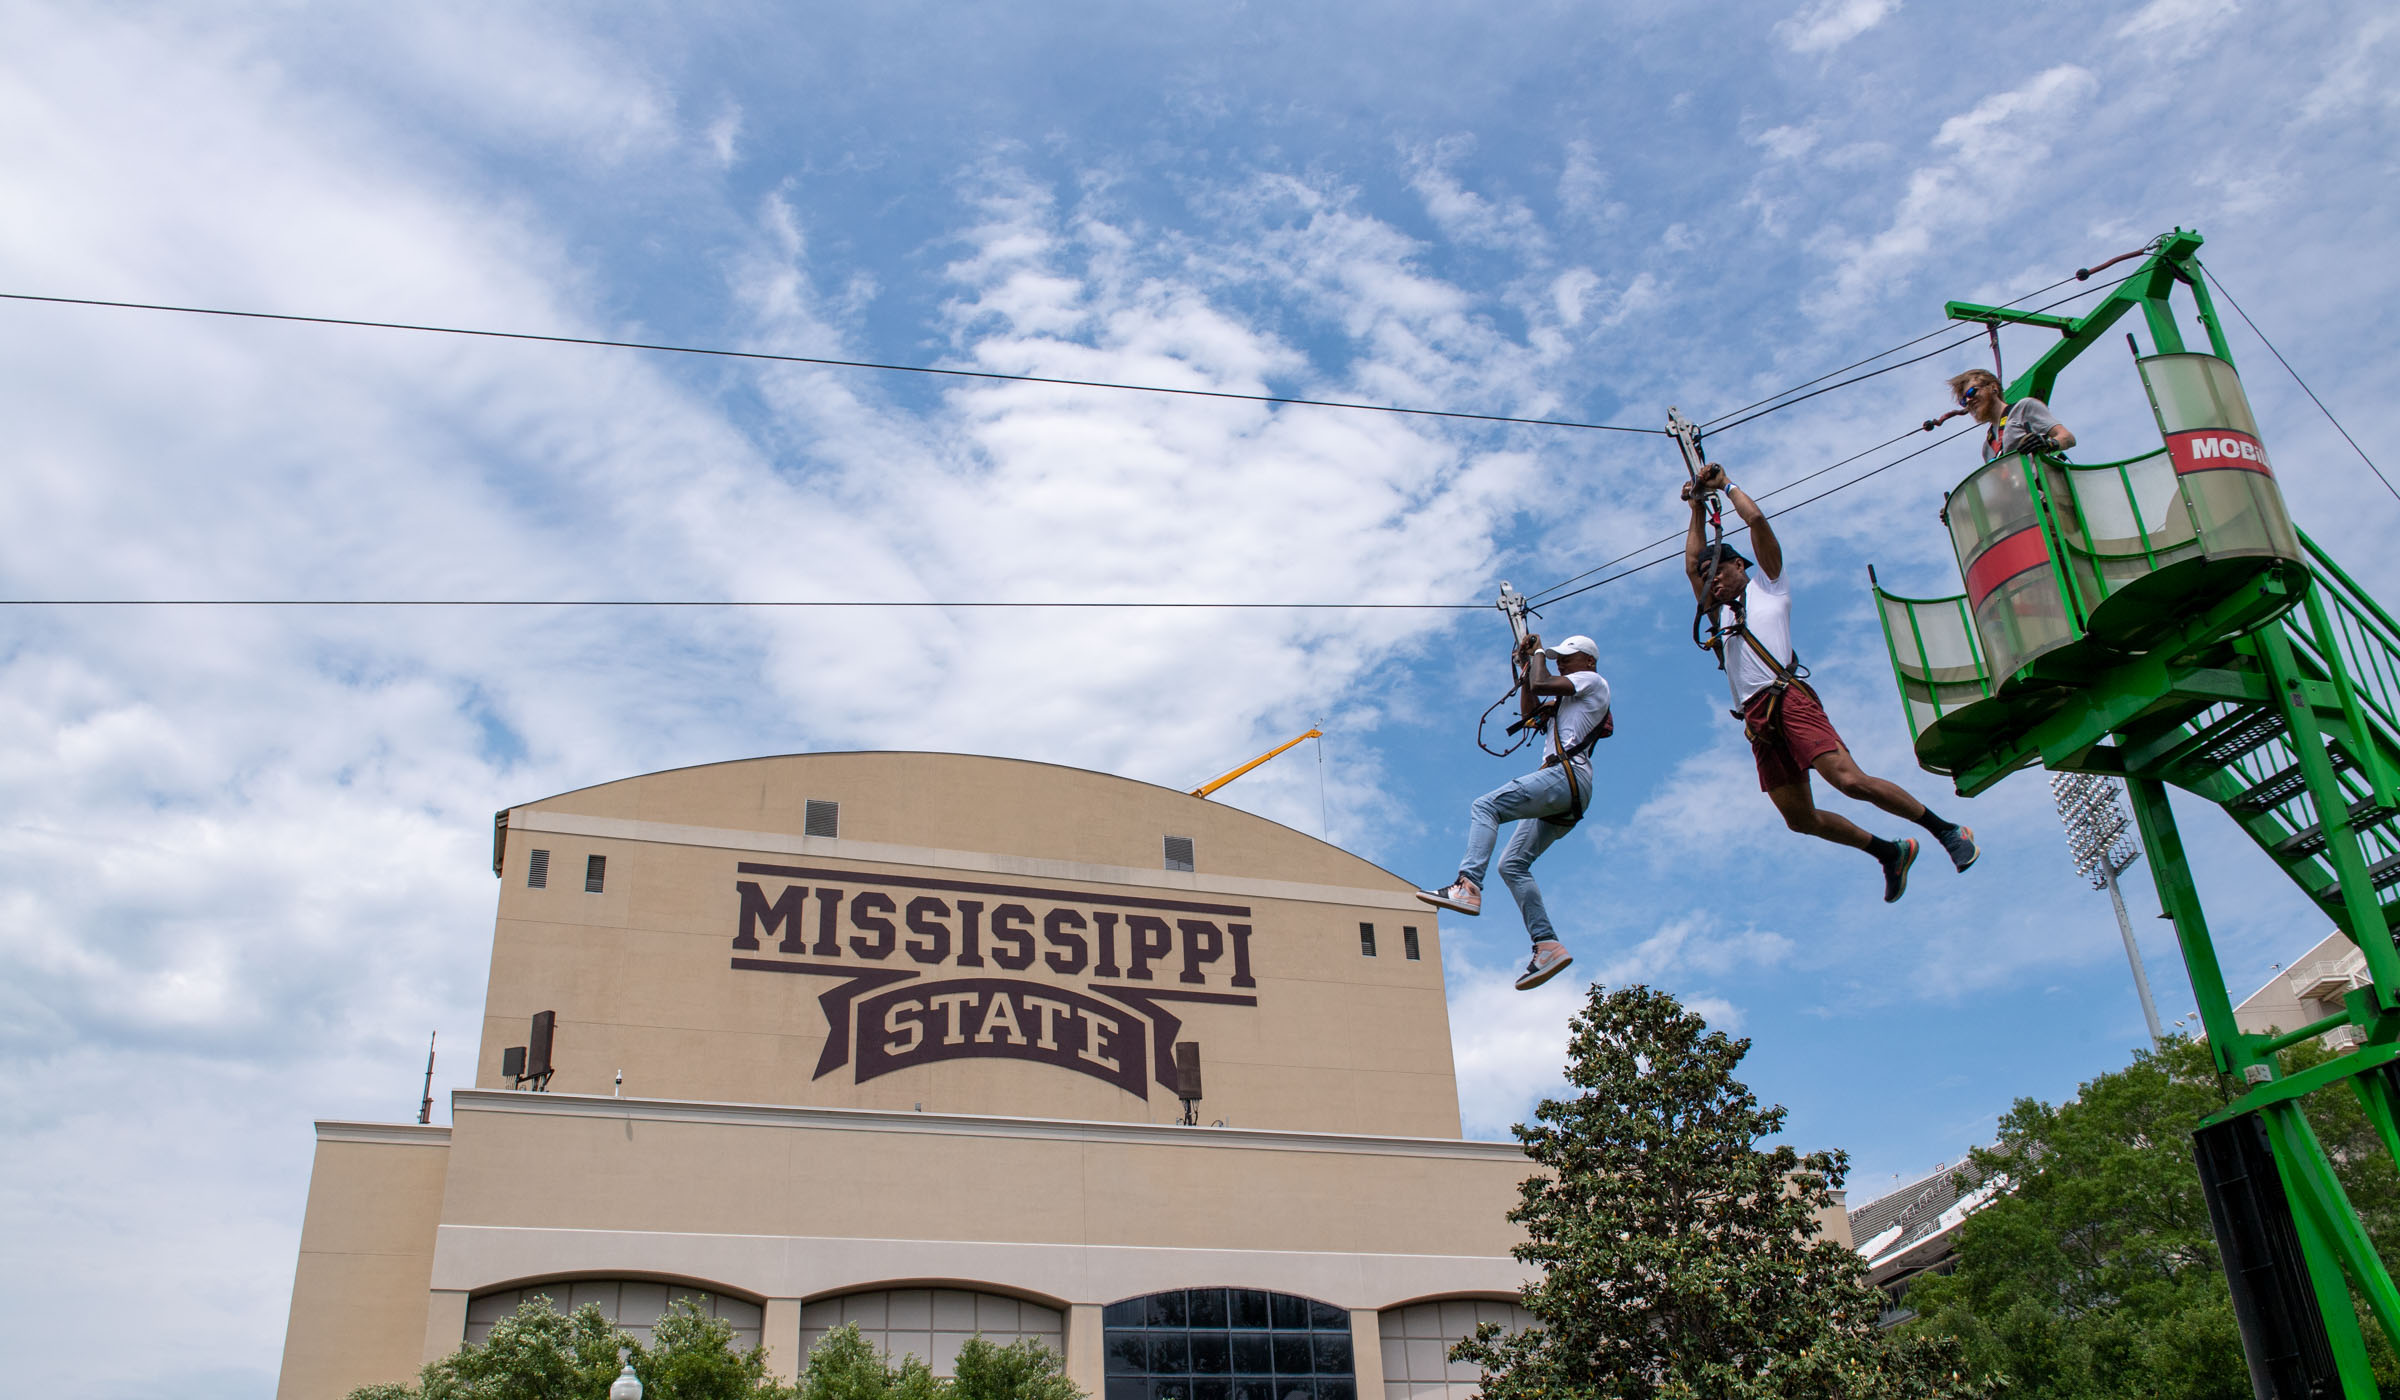 Two students launch down a zipline at the Junction, with the Mississippi State logo of the Jumbotron behind them.